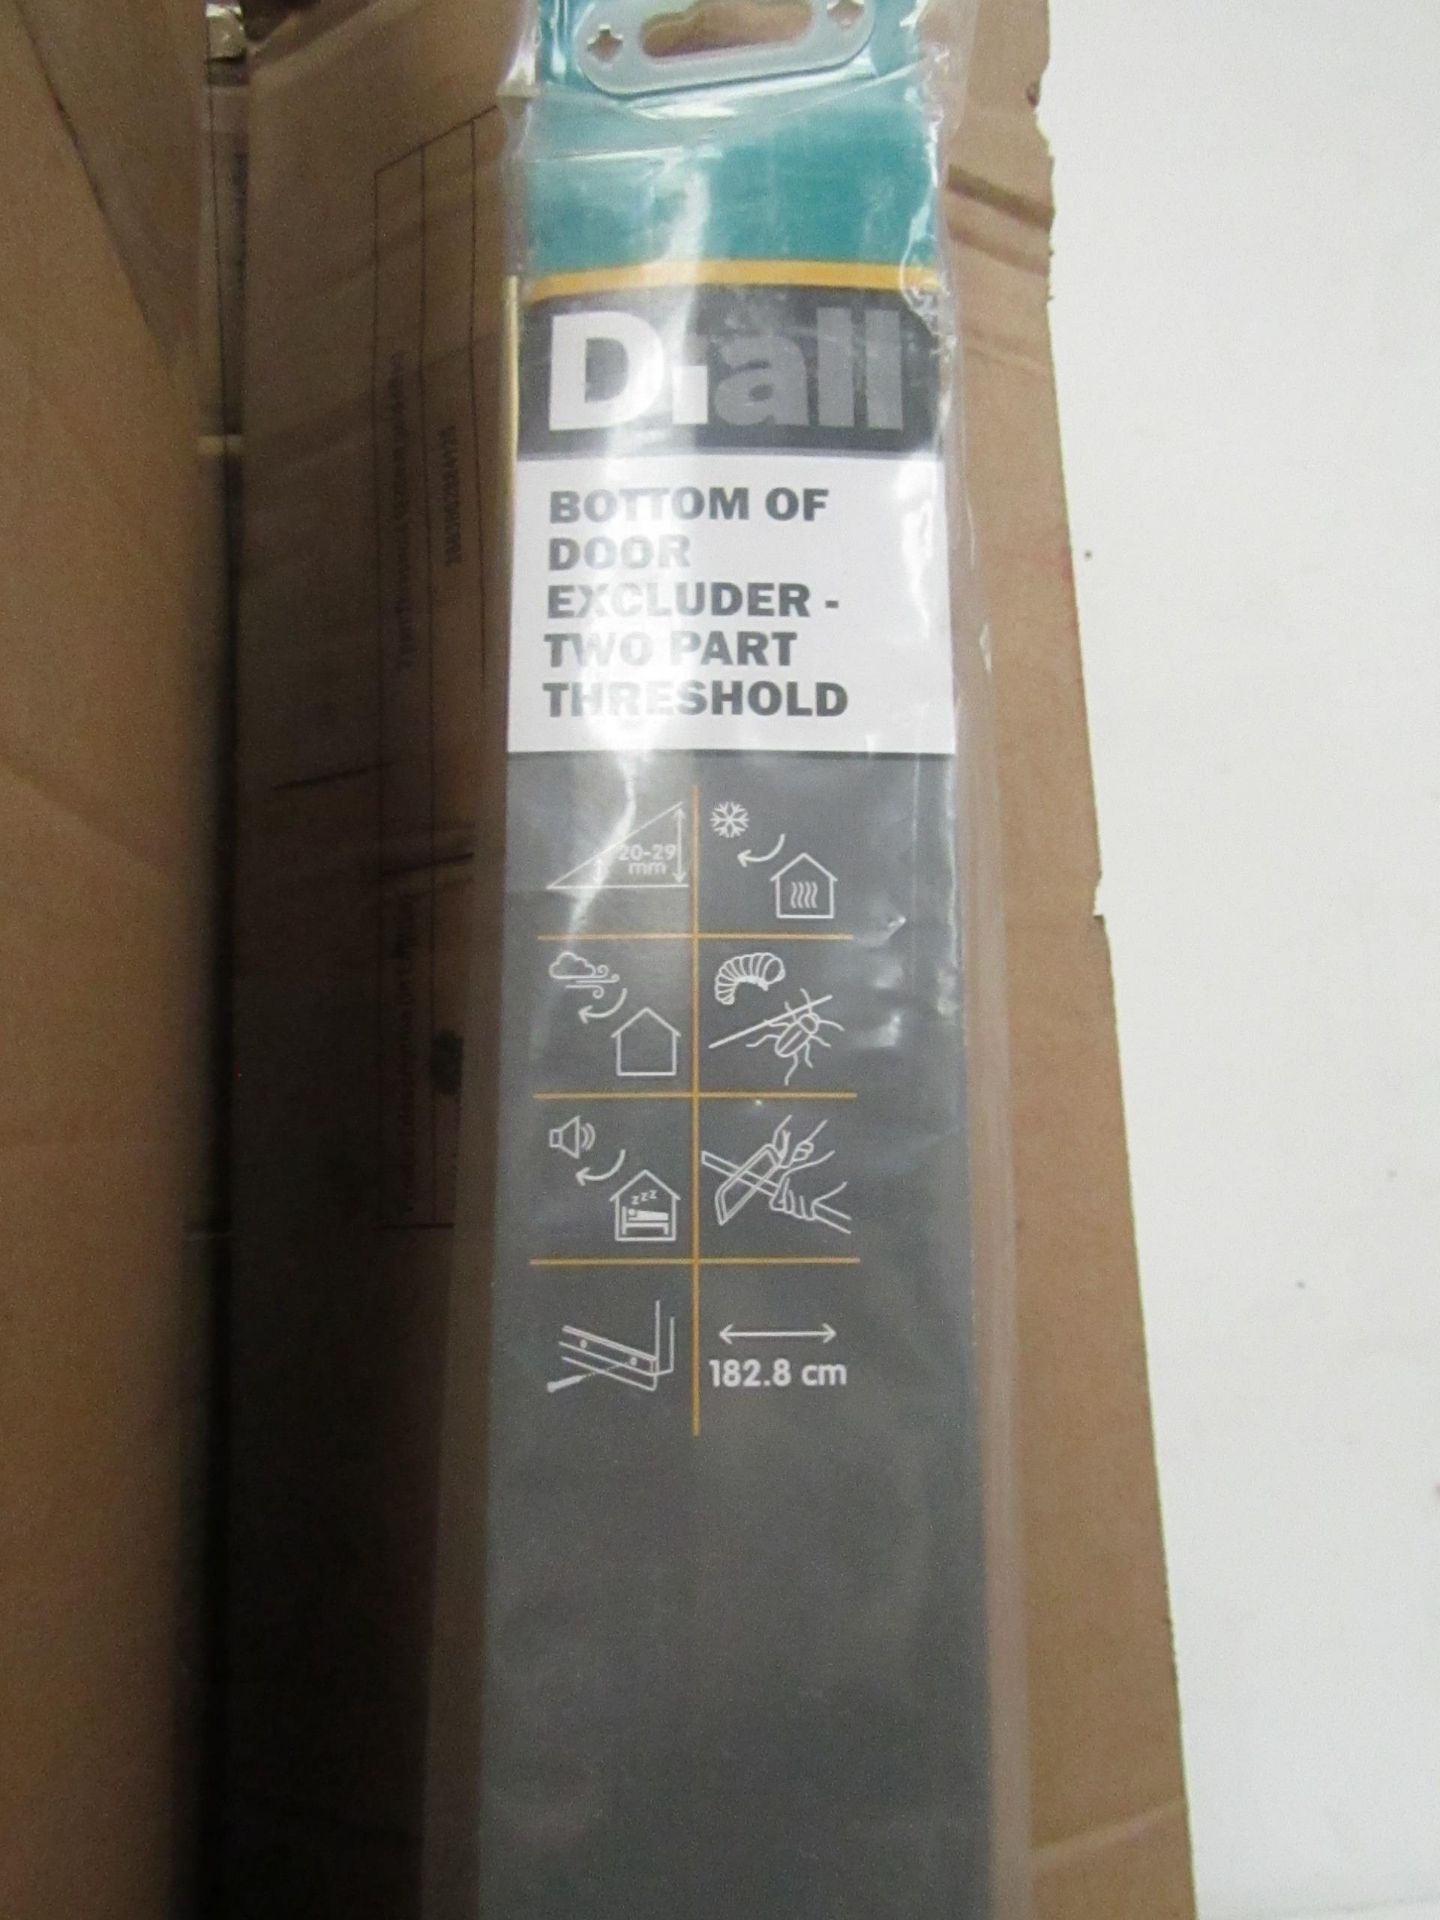 10x Diall - Bottom Of Door Excluder-Two Part Threshold ( 182.8 cm Long ) - Unused & Boxed.